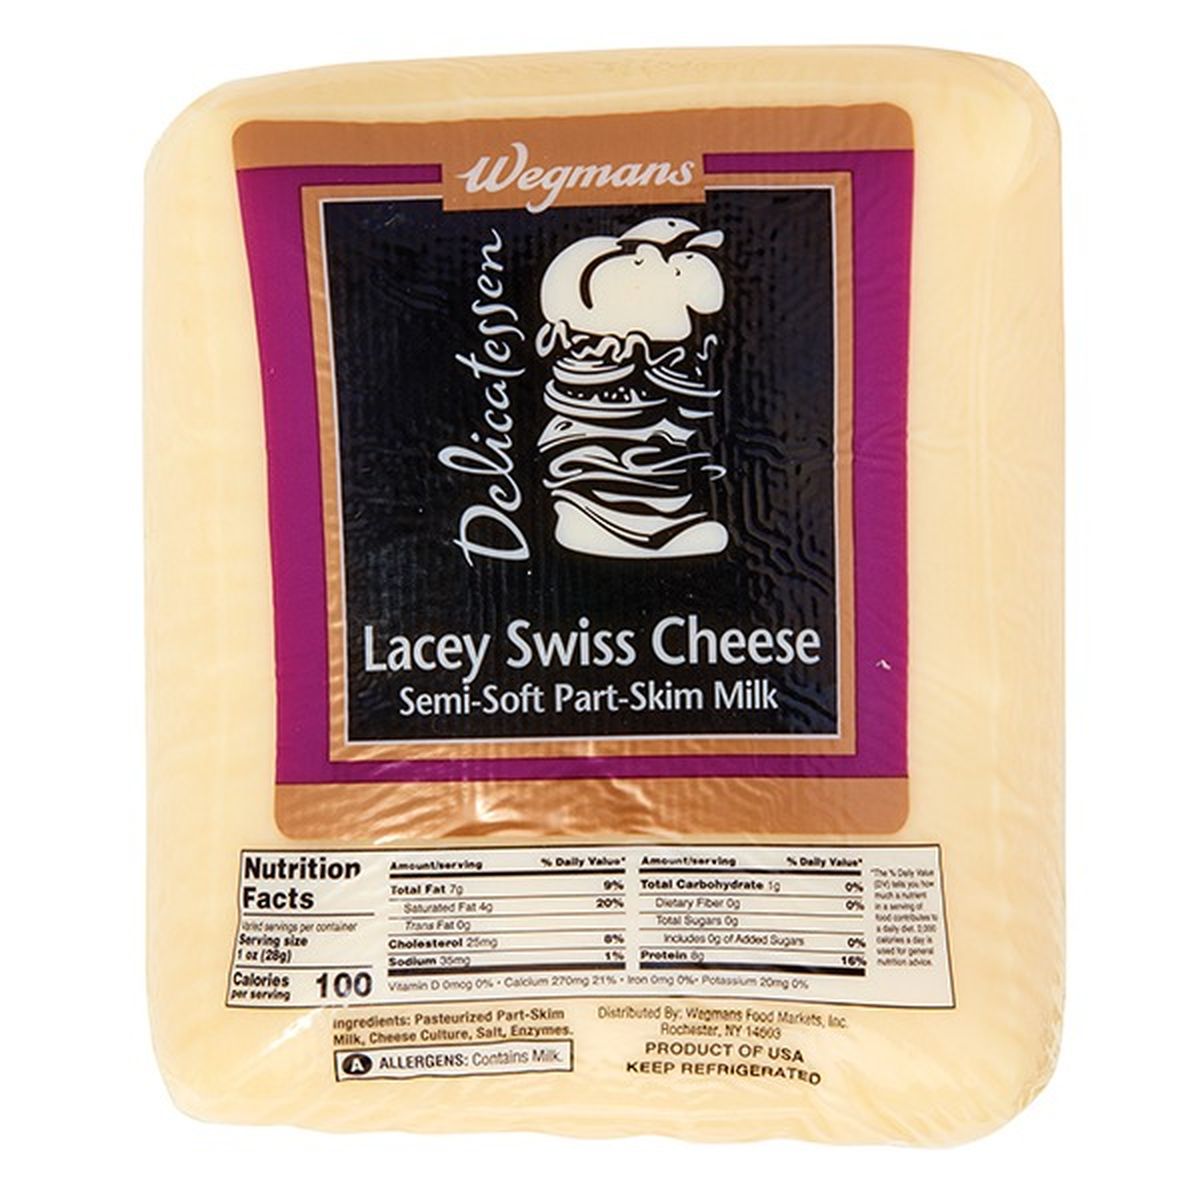 Calories in Wegmans Lacey Swiss Cheese